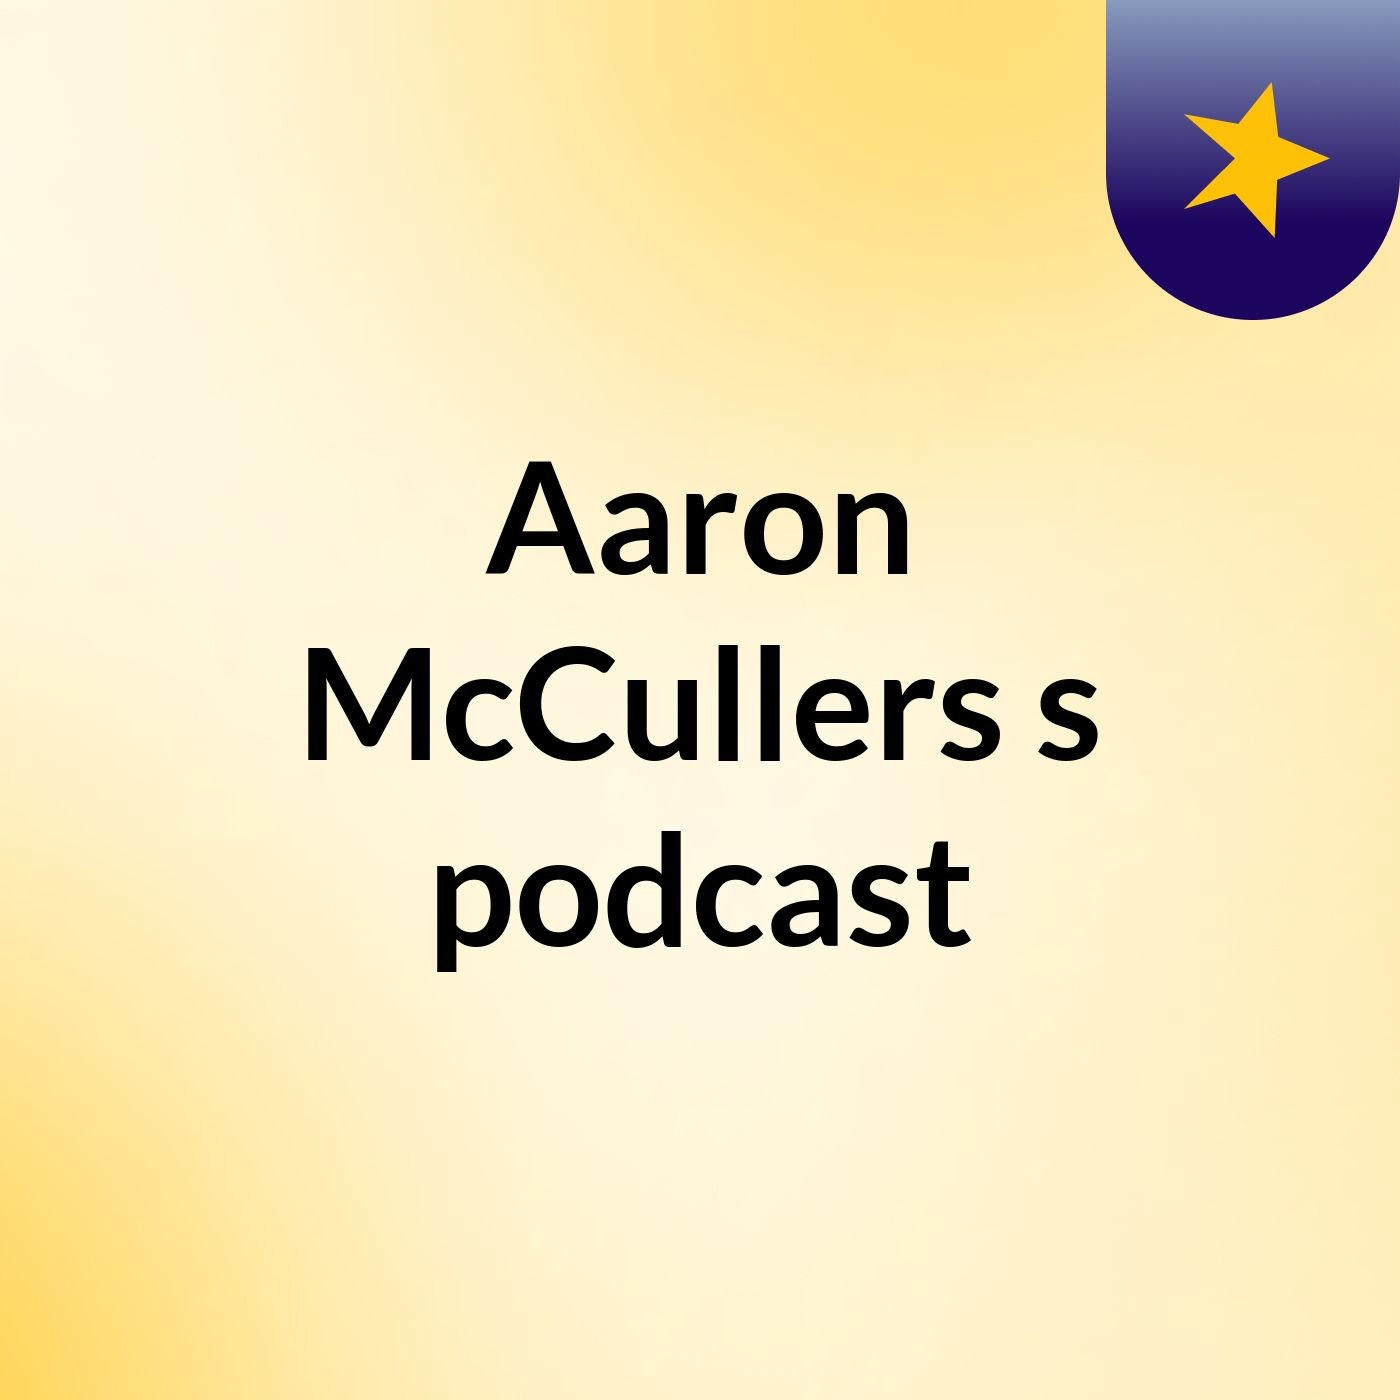 Aaron McCullers's podcast